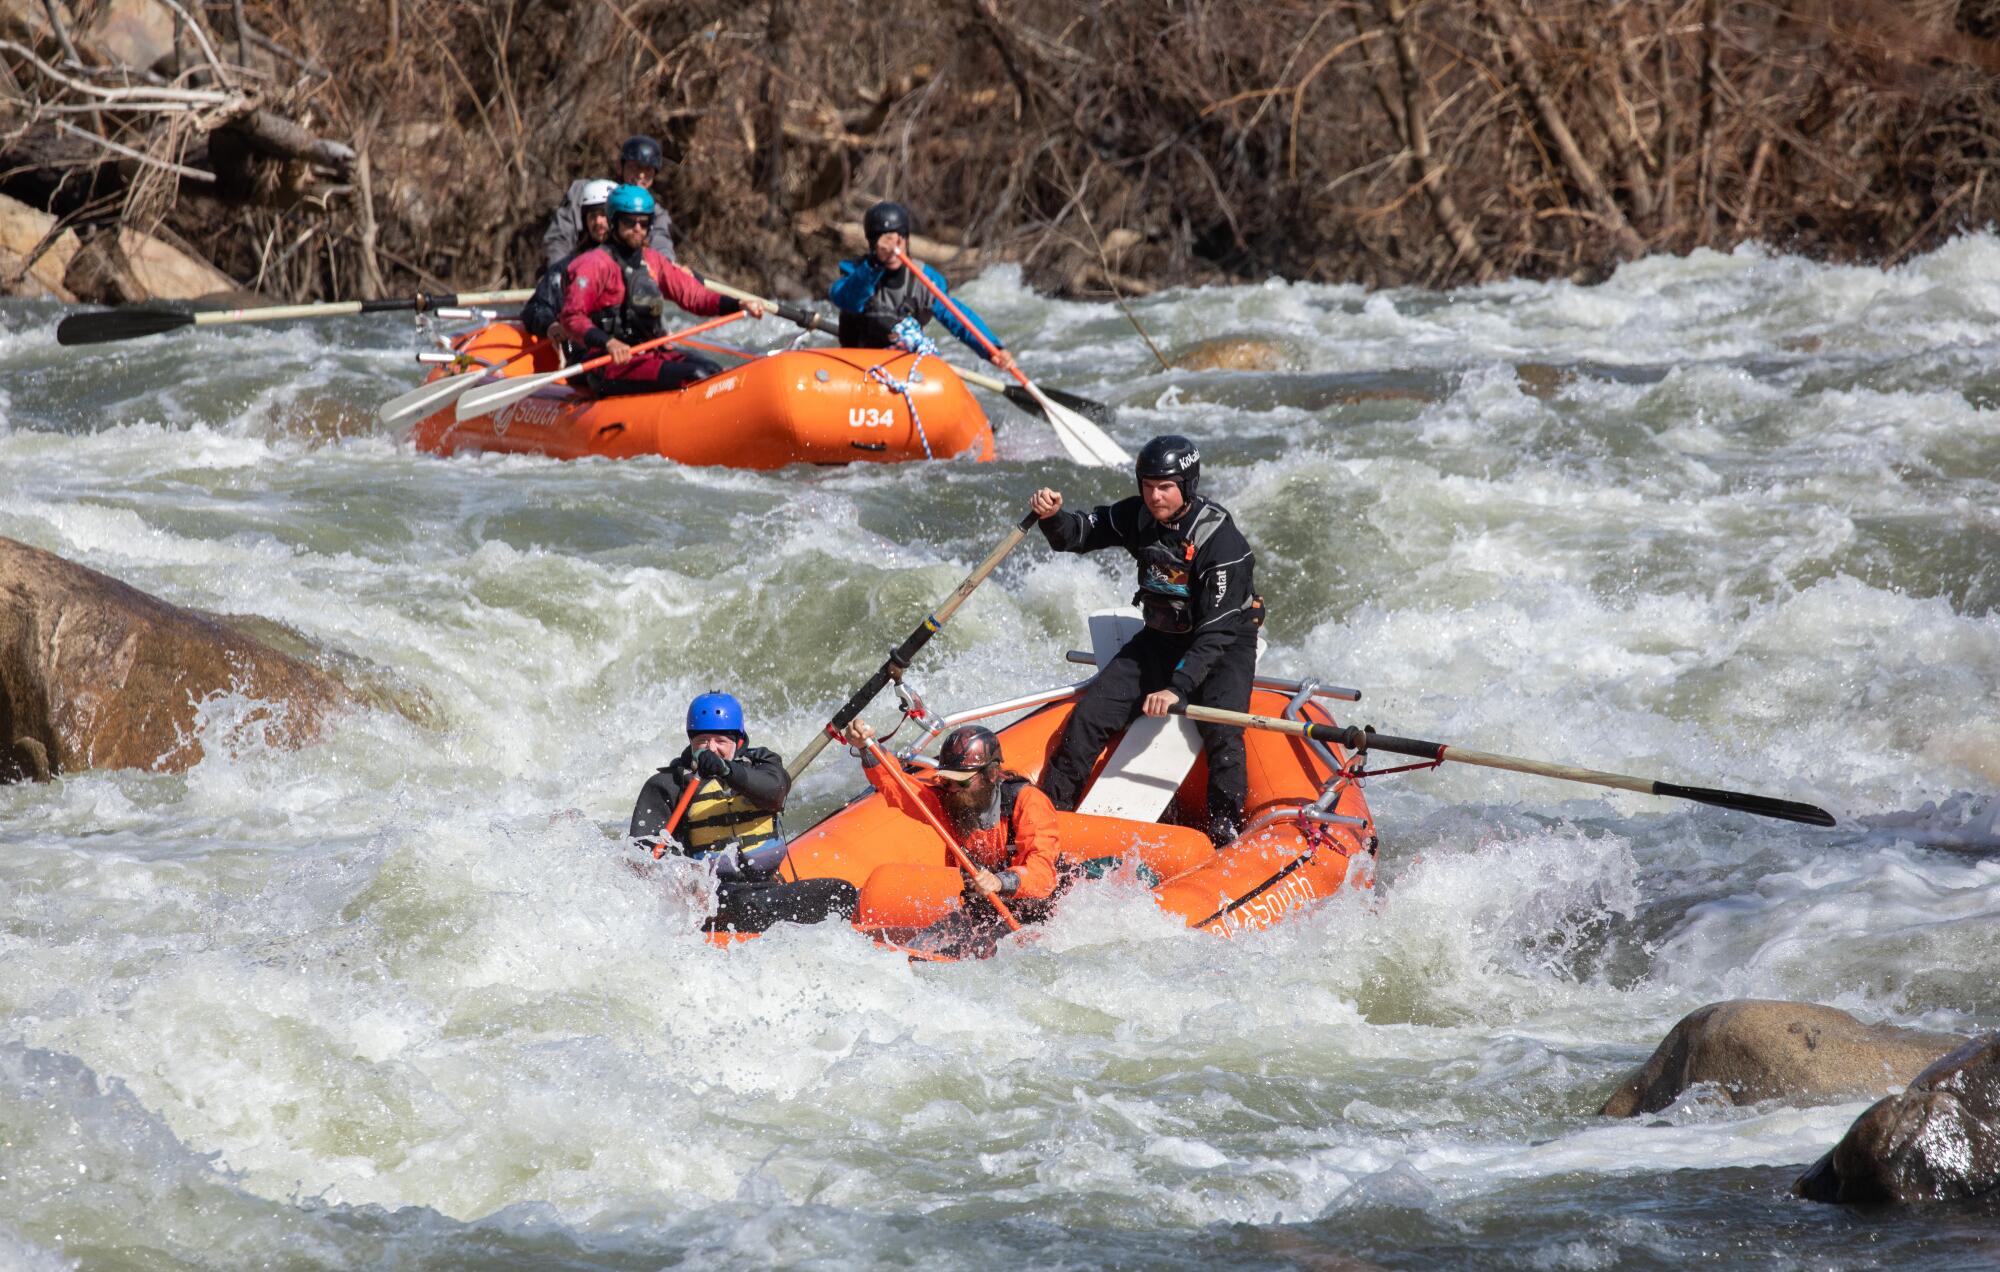 Whitewater rafters navigate the rapids of the Upper Kern River.